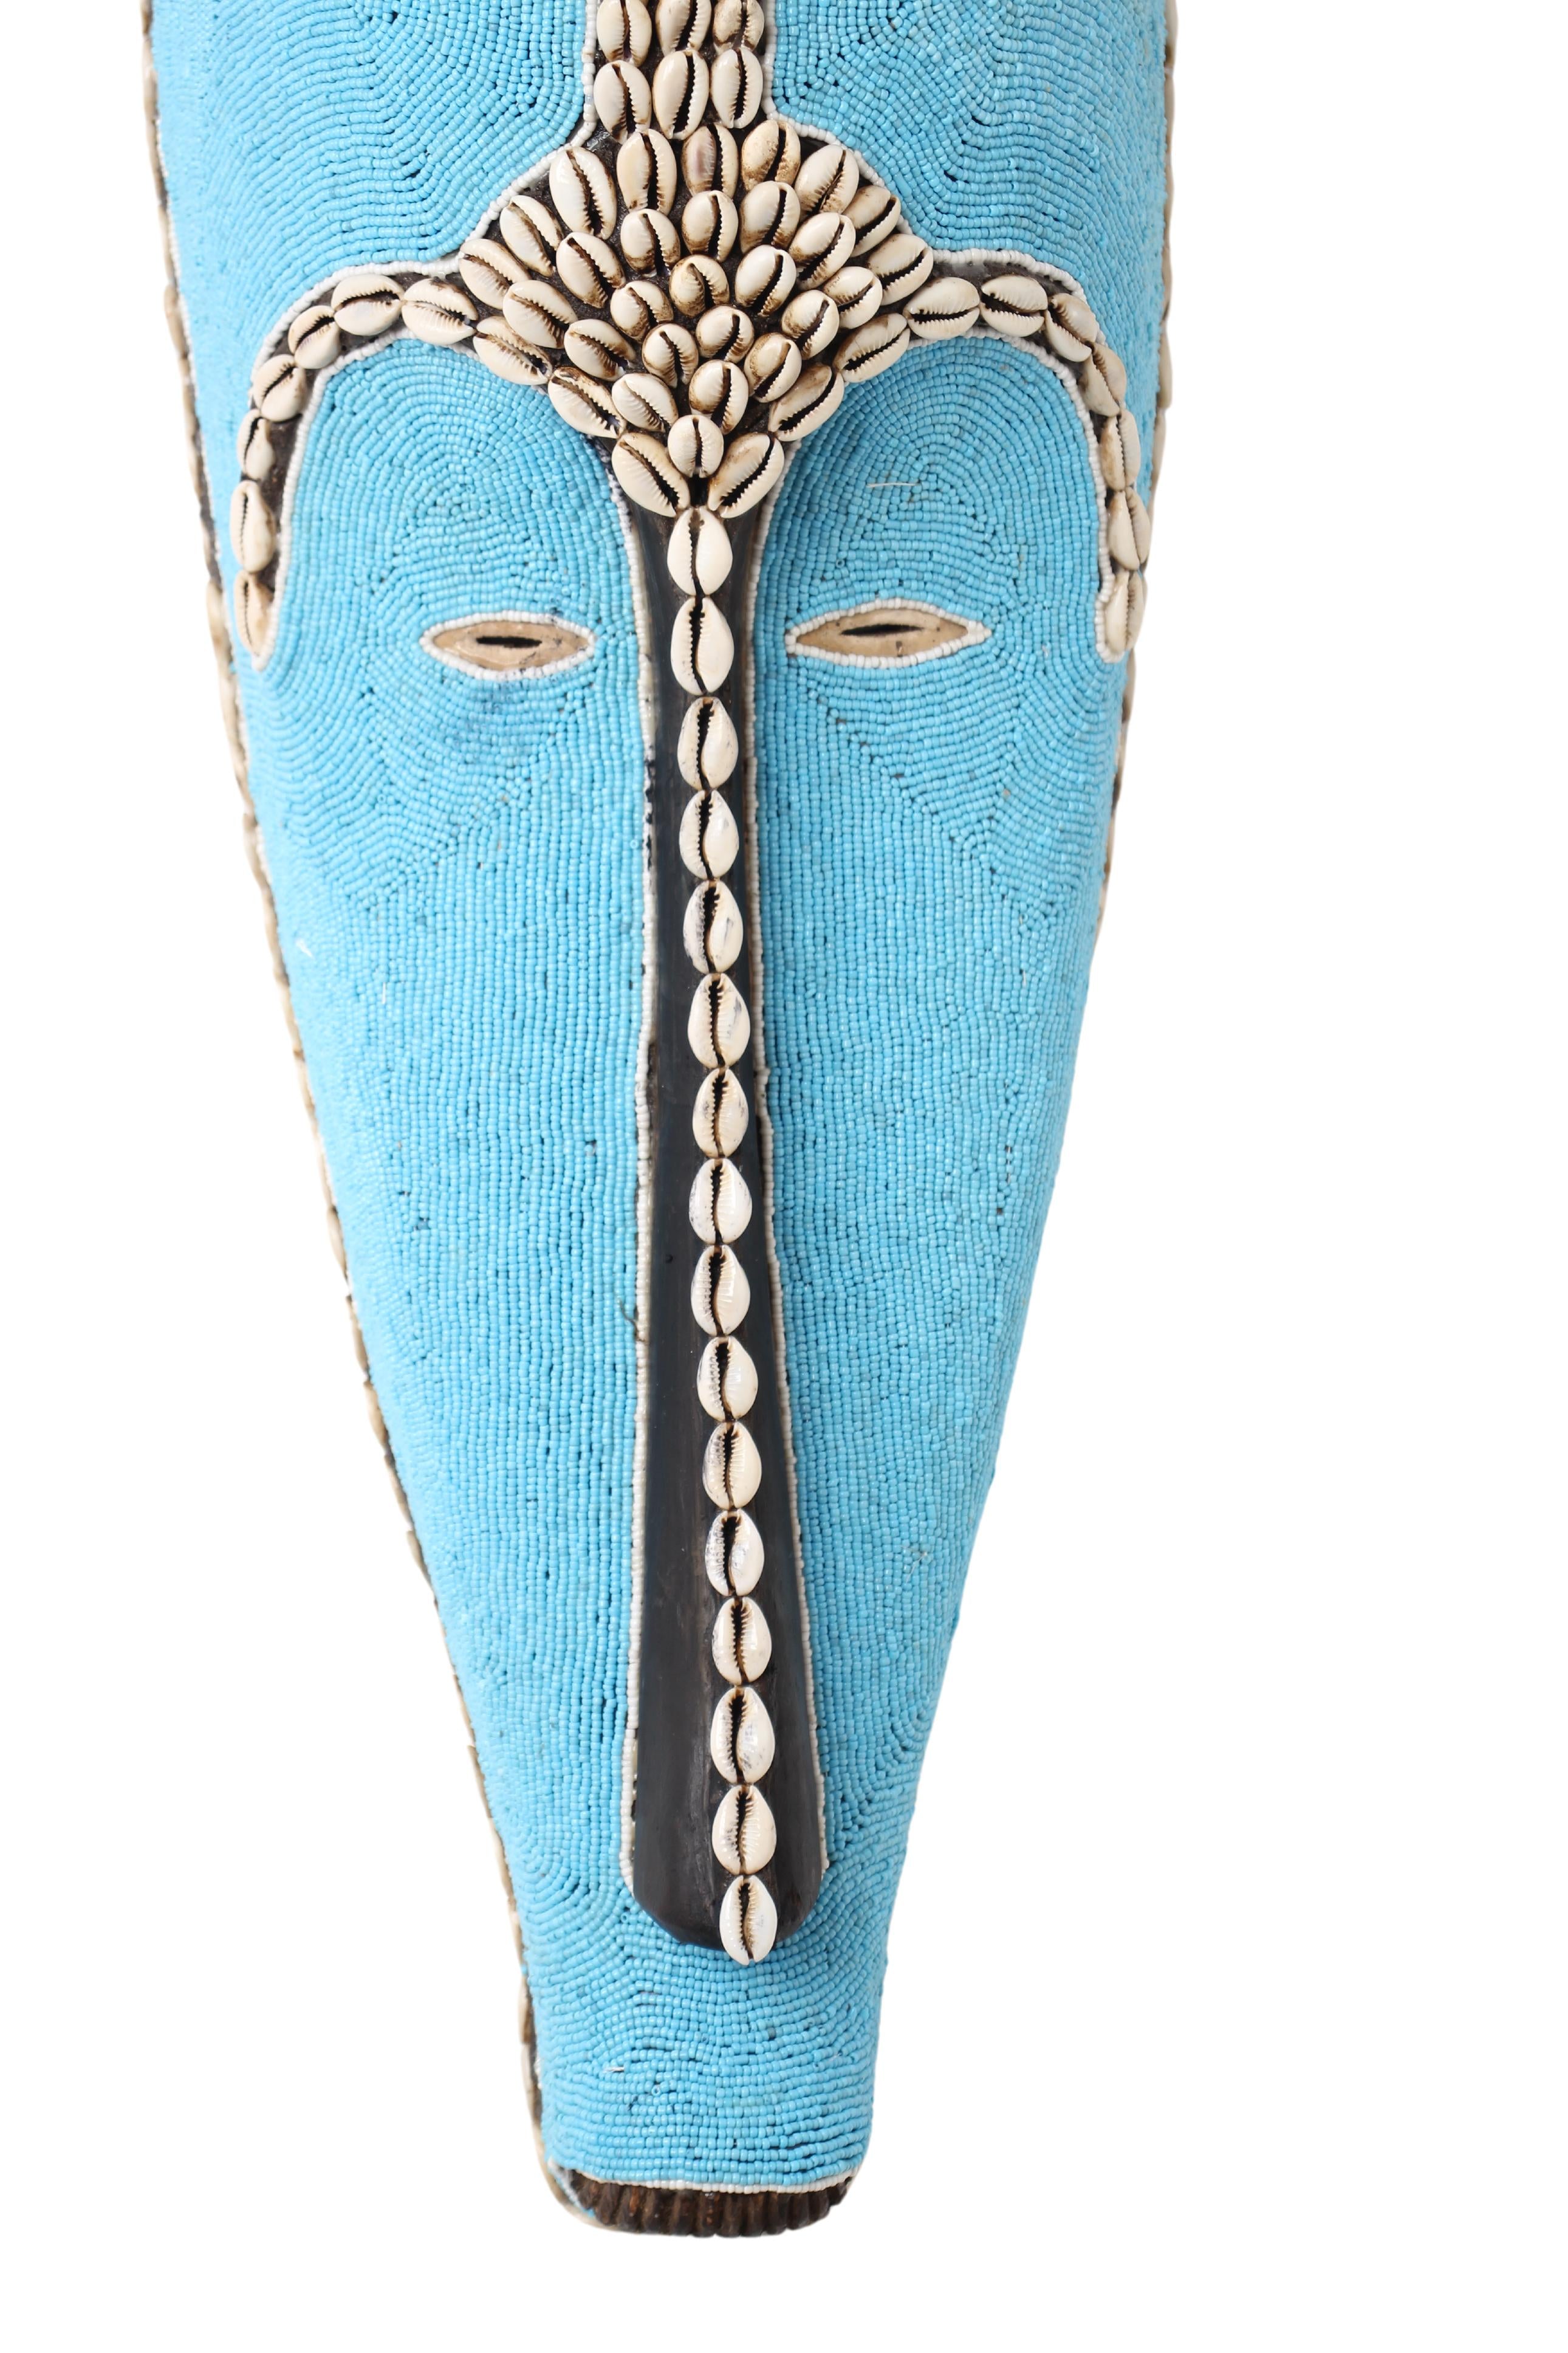 Fang Tribe Beaded Mask ~25.2" Tall (New 2024)